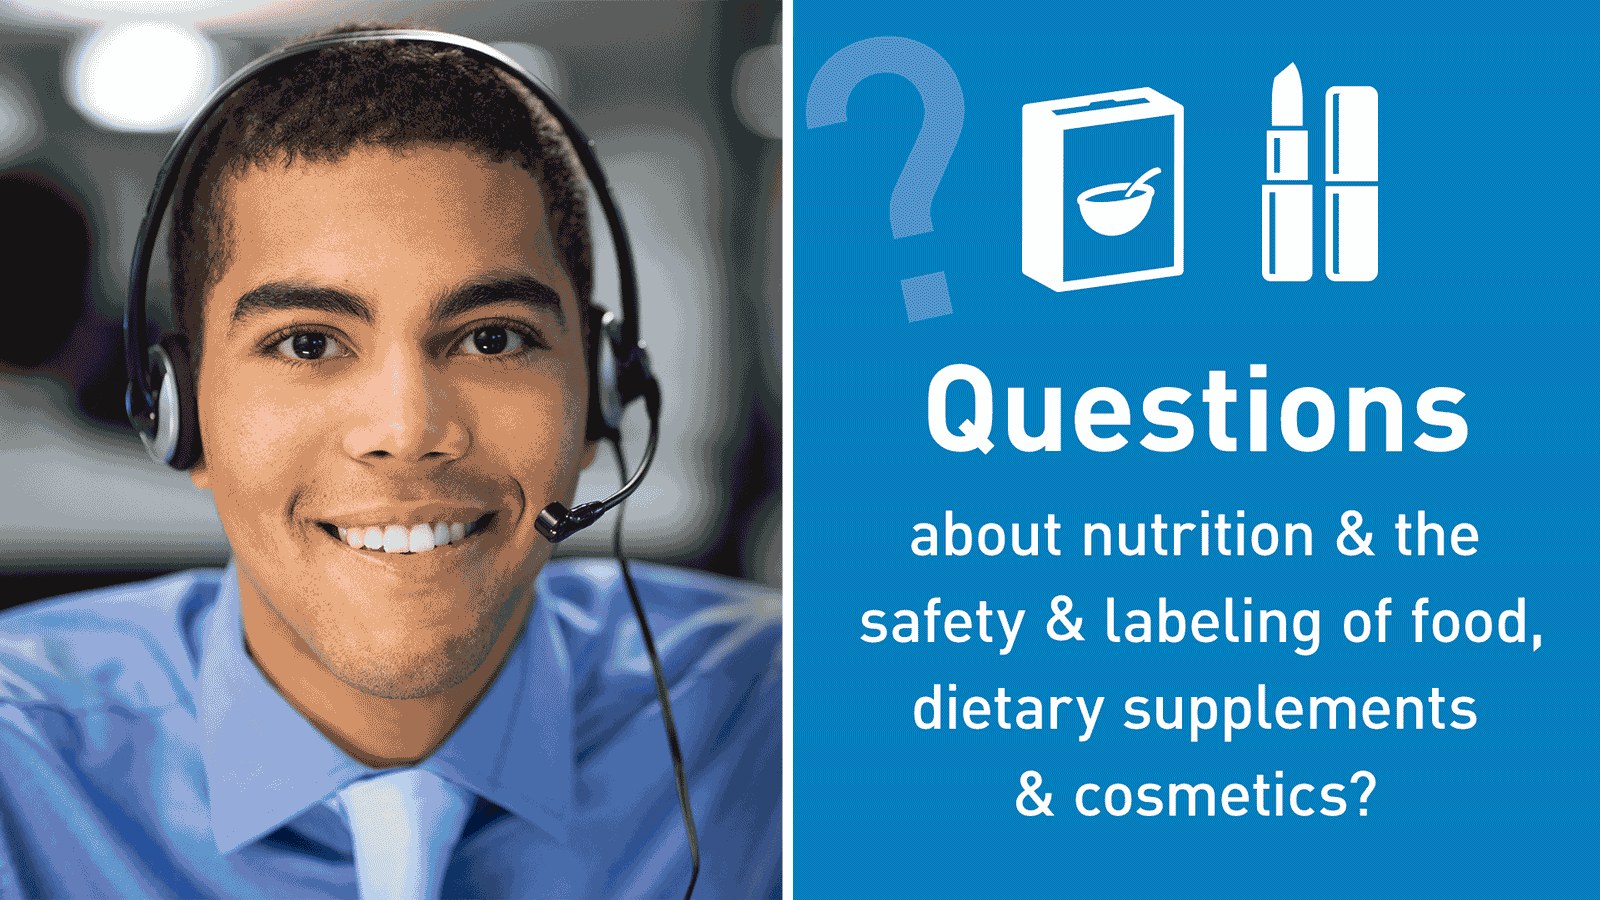 Animated graphic with photo of young smiling call center employee, icons of packaged food and cosmetics, and the words: Questions about nutrition & the safety & labeling of food, dietary supplements and cosmetics? Just ask FDA's Food & Cosmetic Information Center (FCIC).